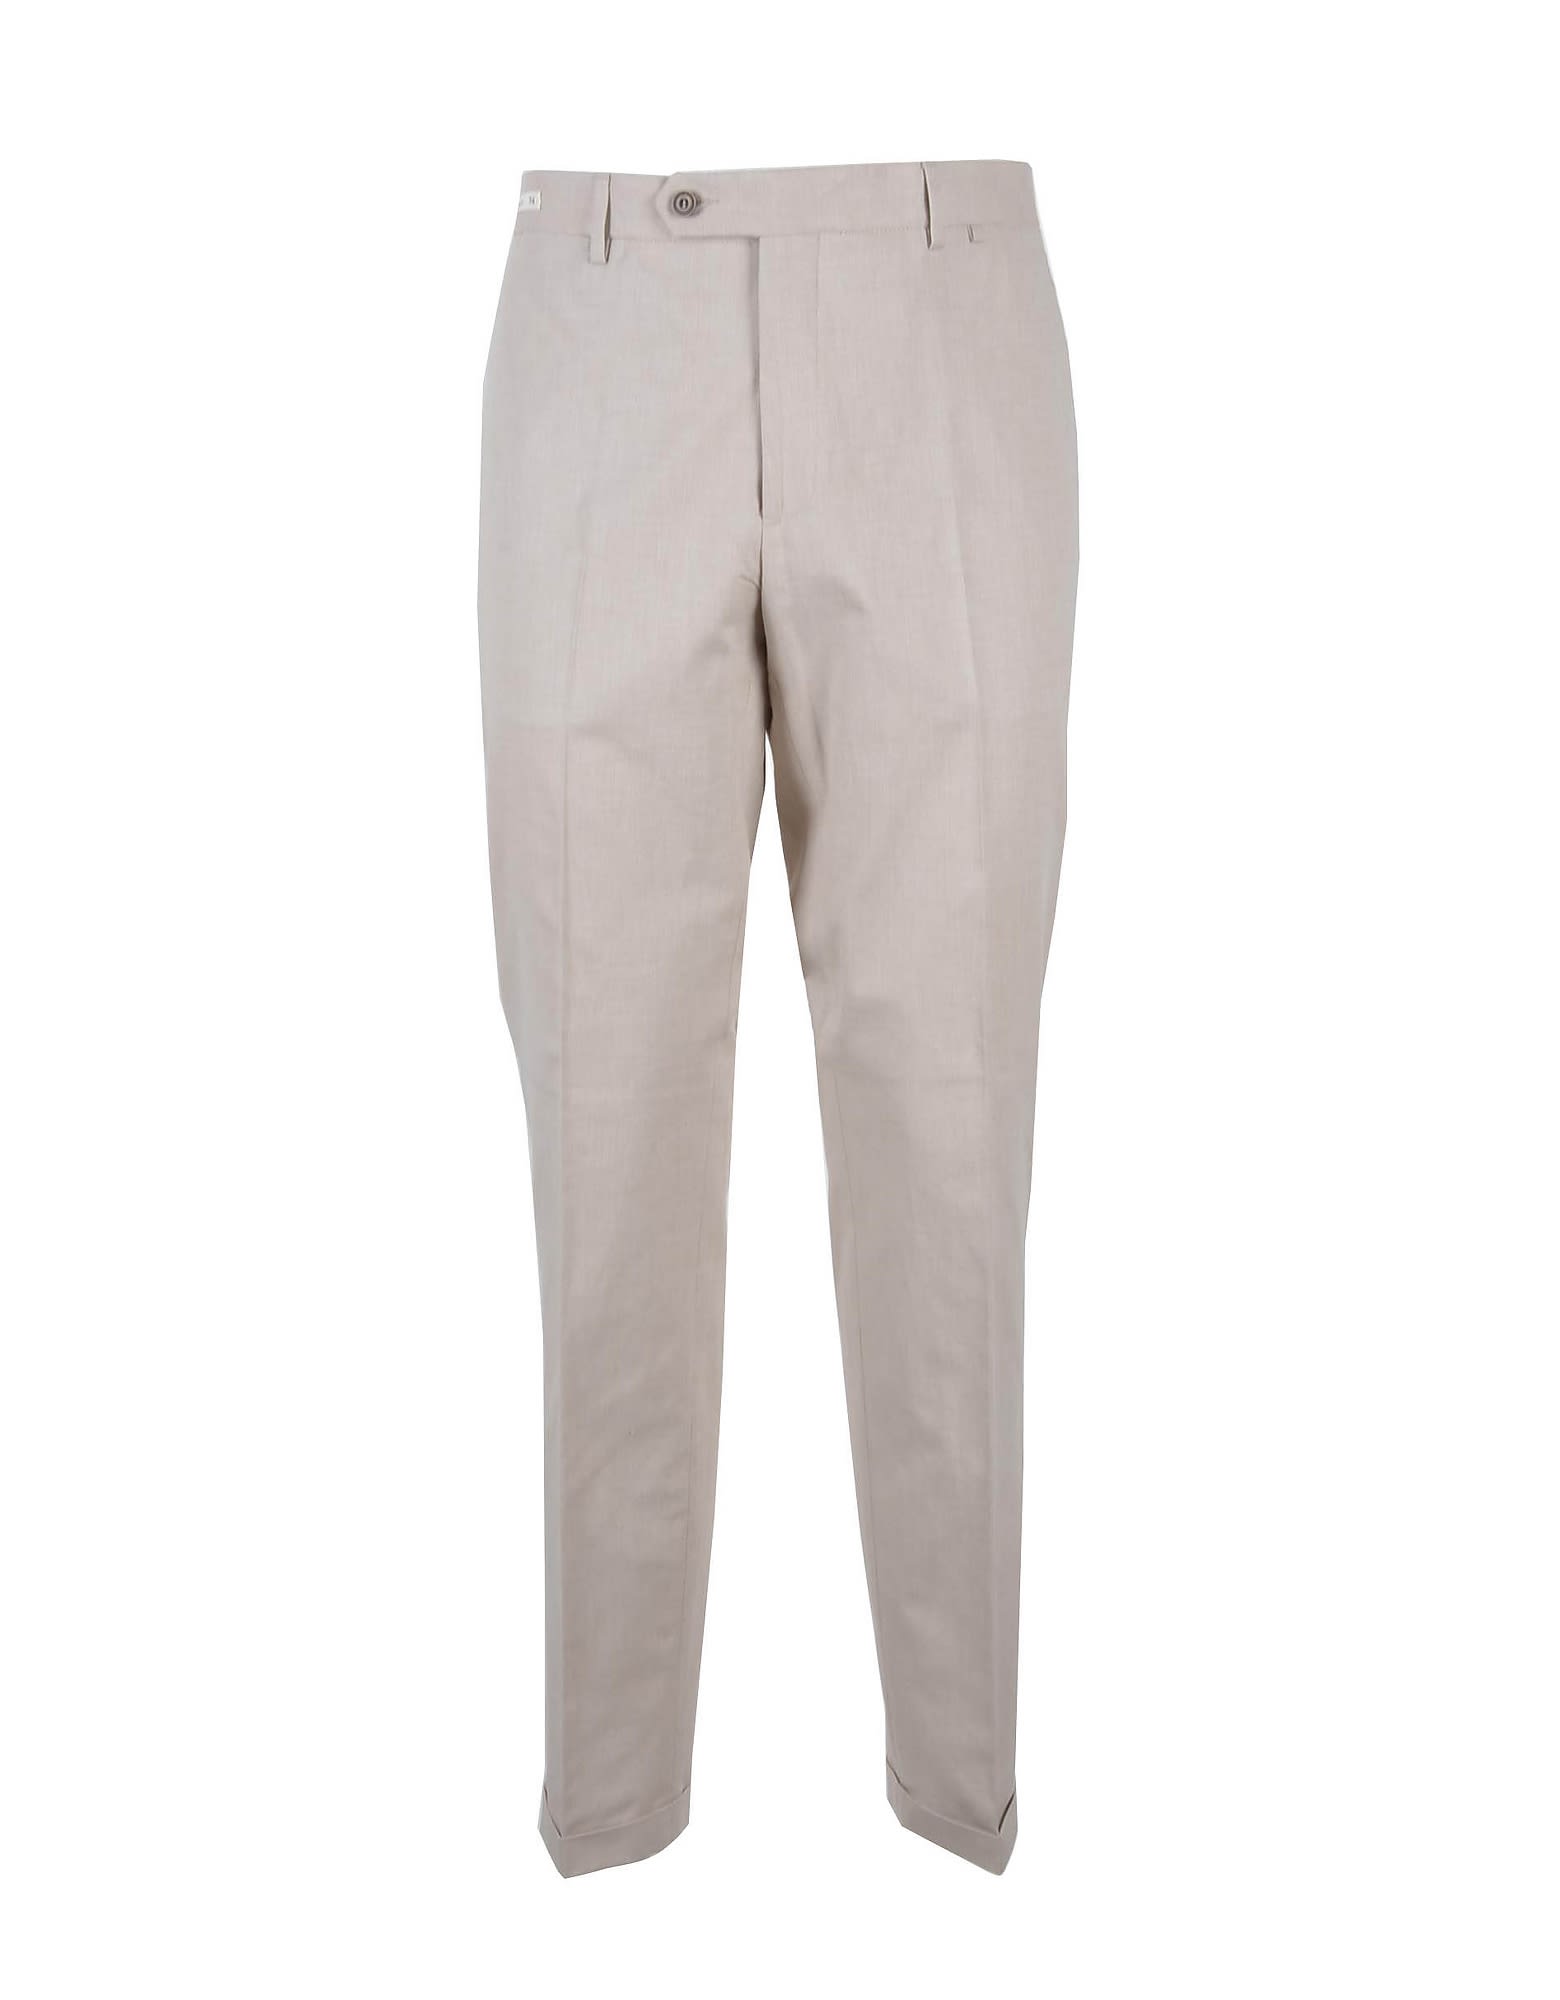 PAOLONI MENS'S BEIGE trousers